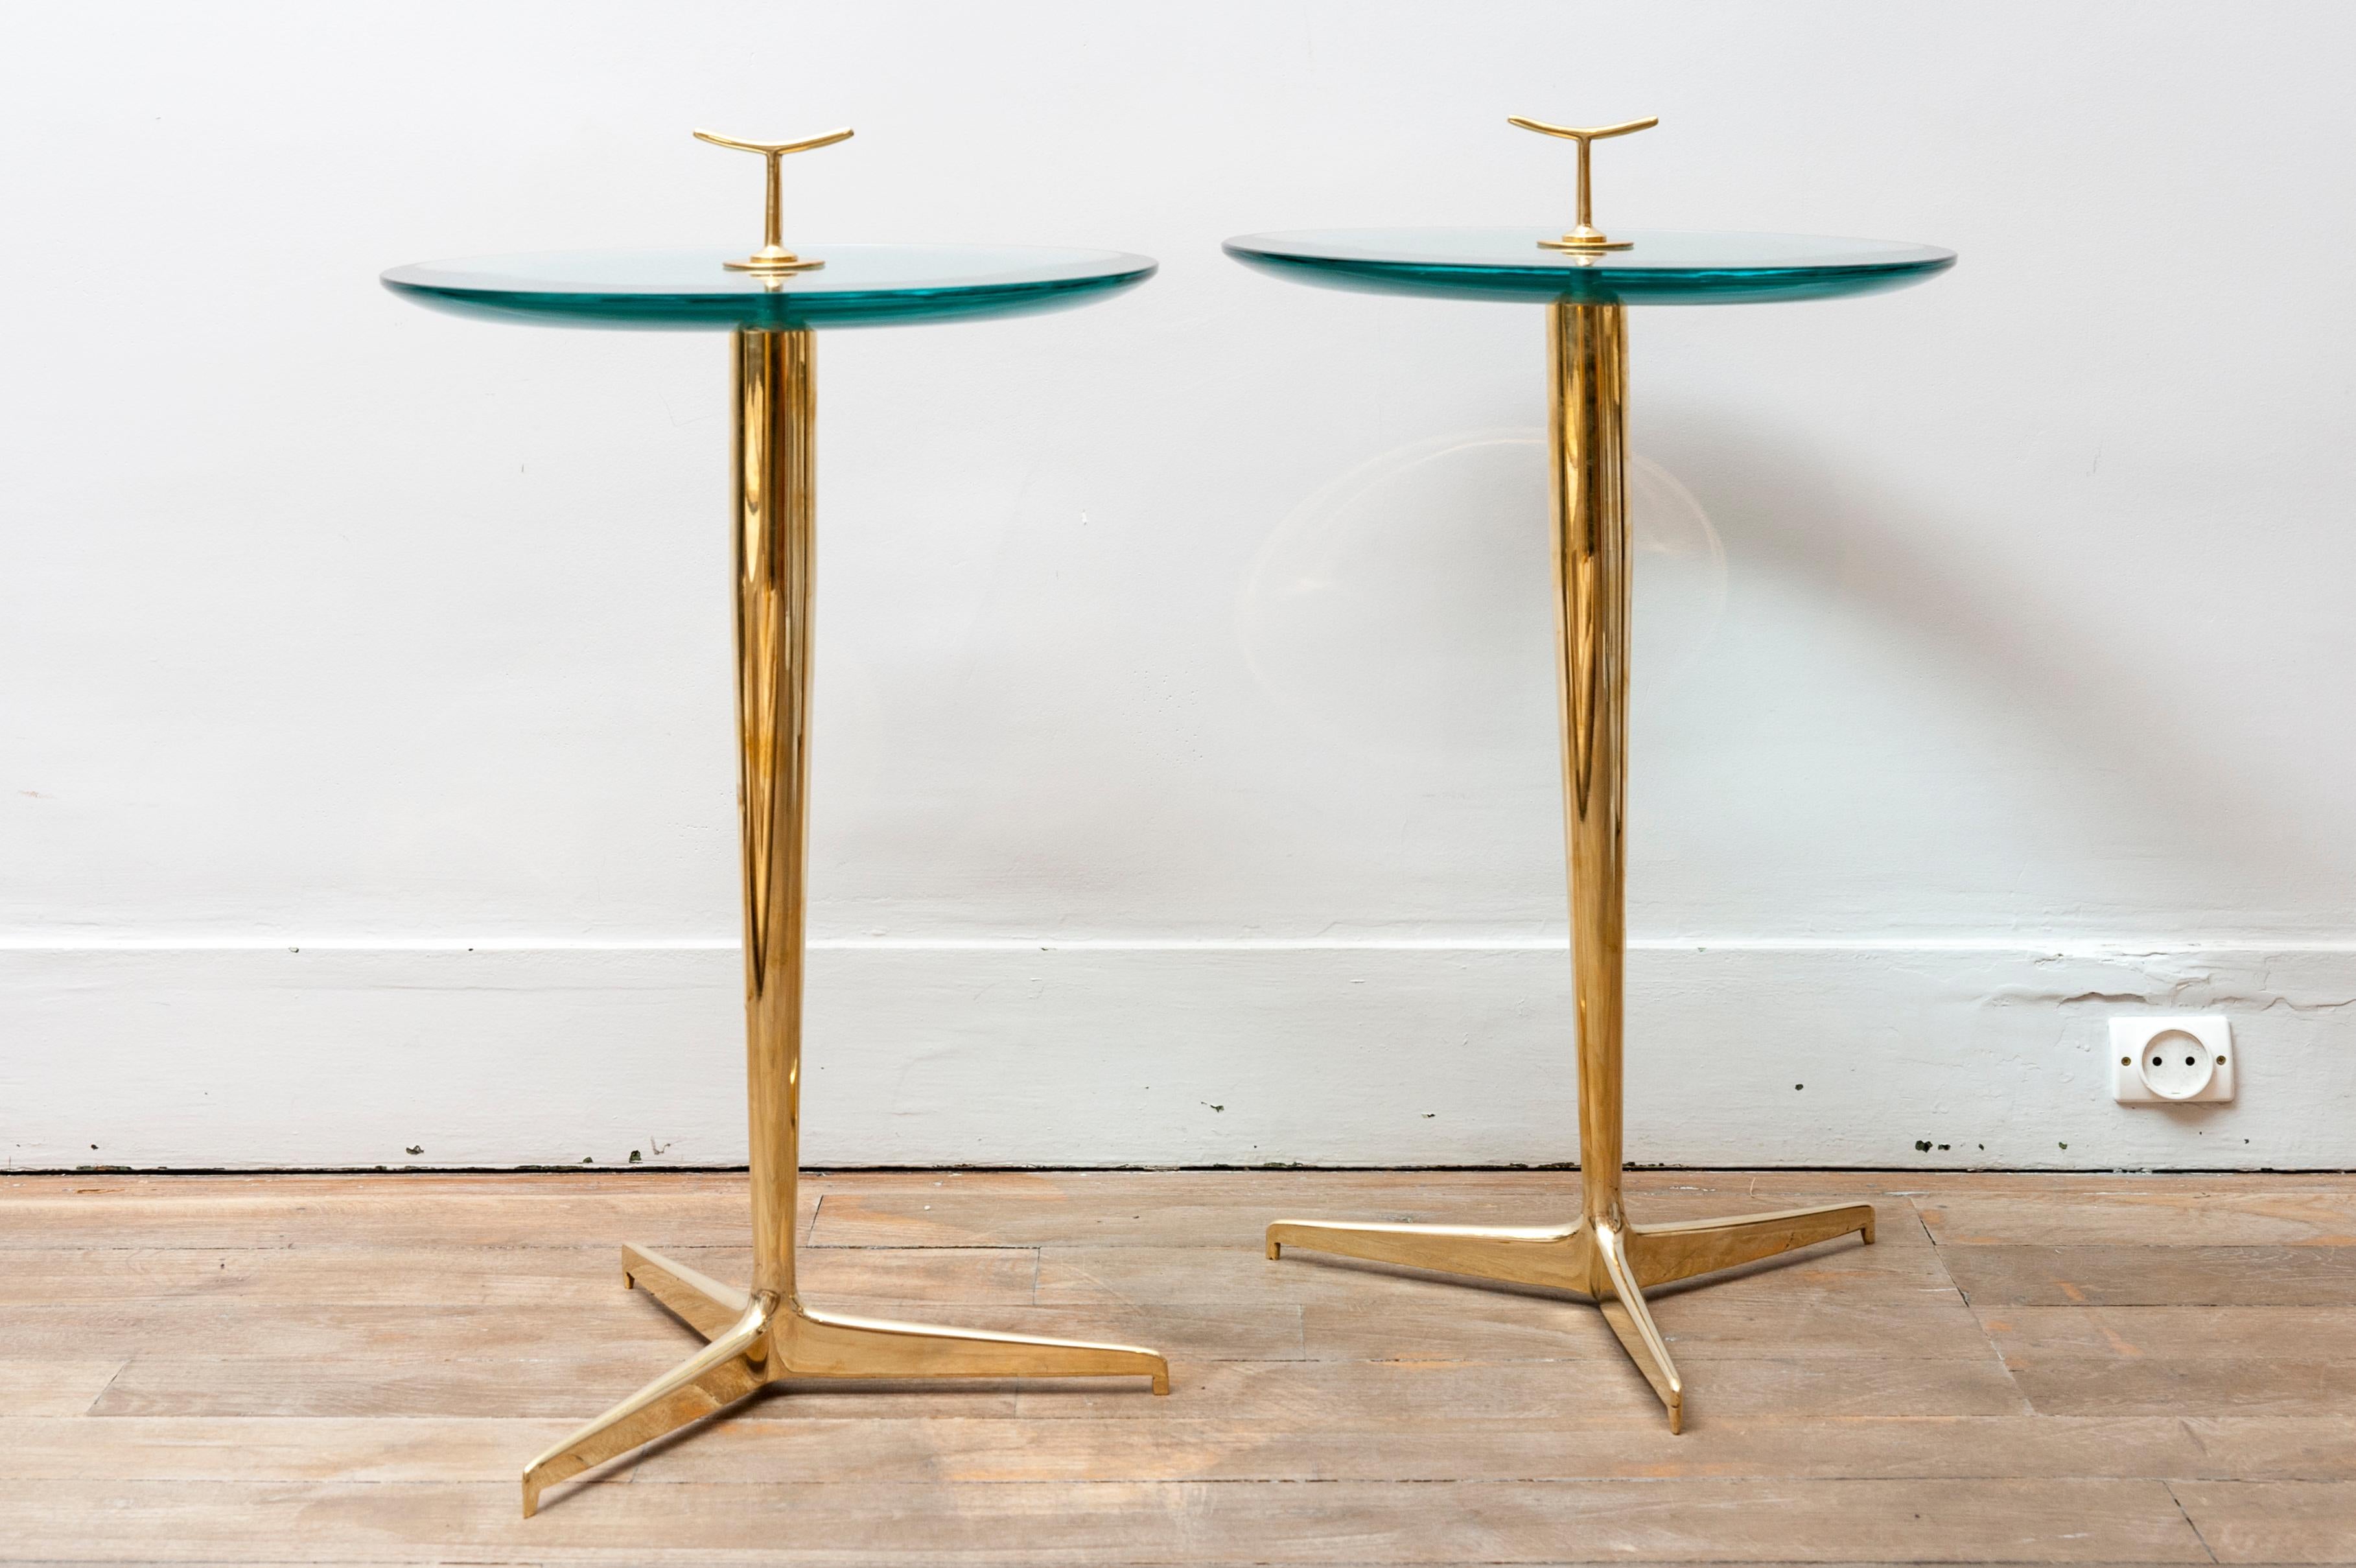 Elegant pair of side tables by Poggi
Brass and thick lens effect glass
Italy, 1990s.

Measures: Height including the handle: 64 cm (25.2 in.)
Diameter 40 cm (15.7 in.)
Tray height 58 cm (22.8 in.).